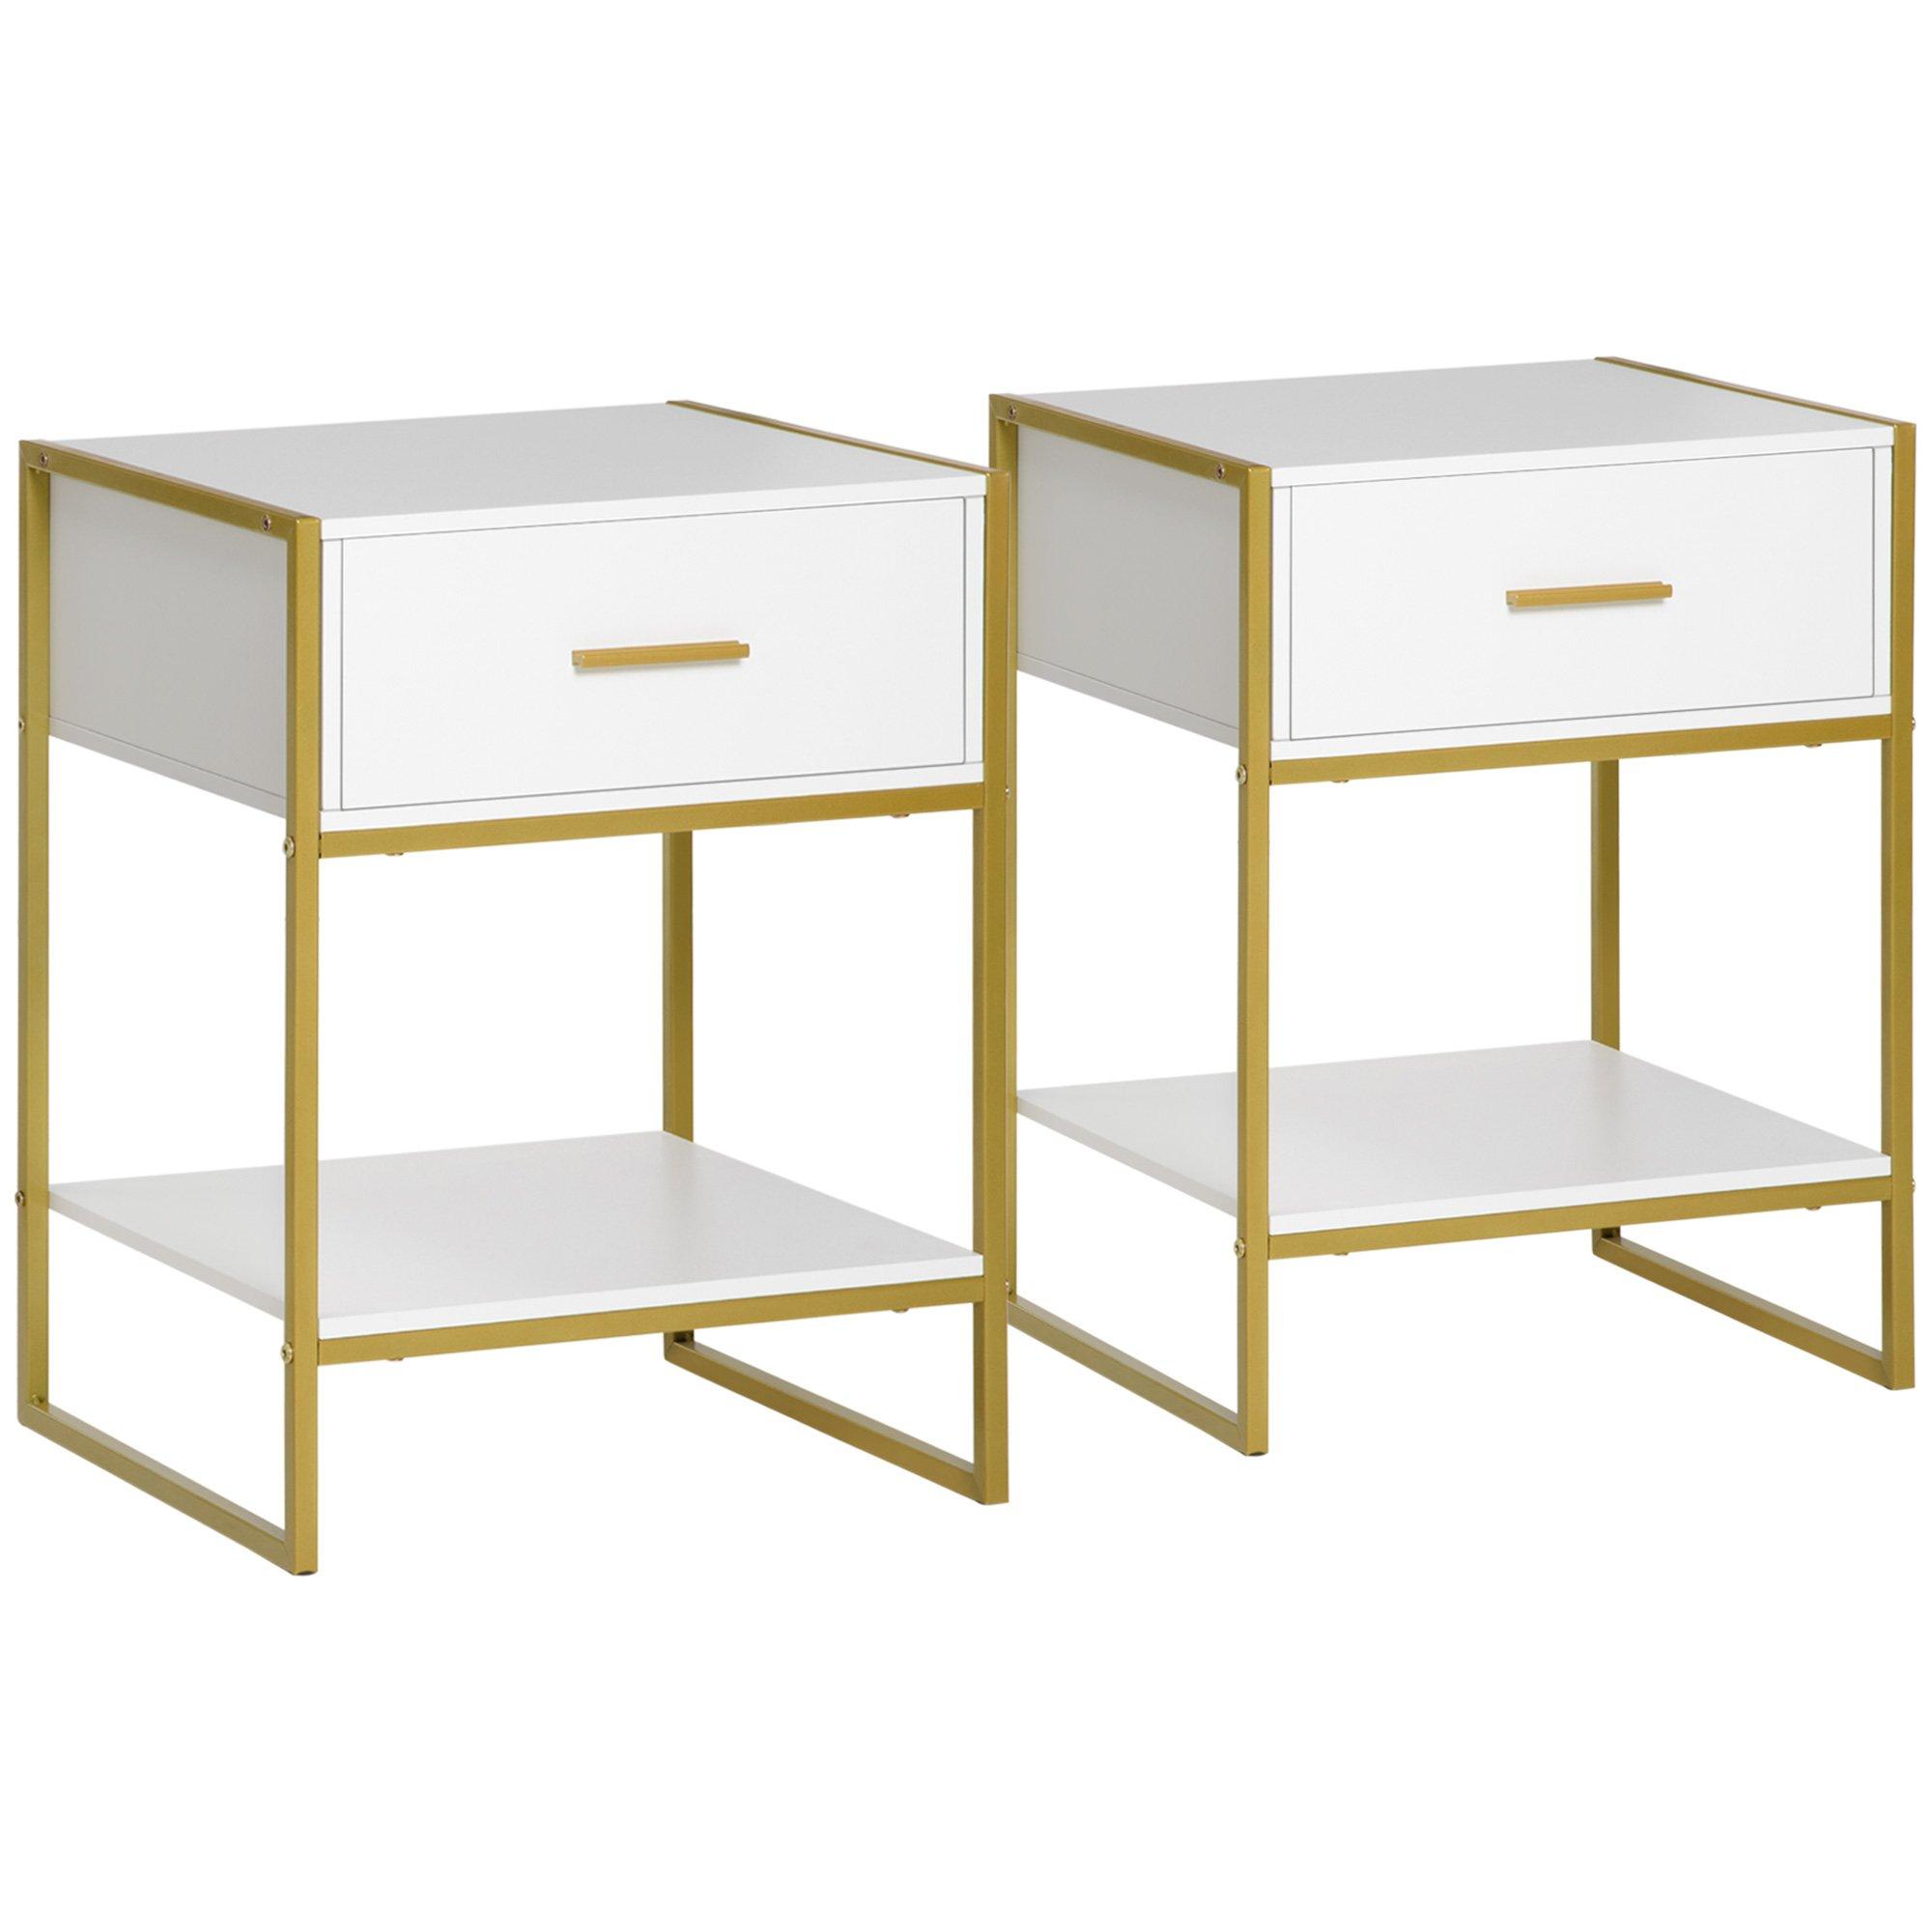 Modern Bedside Table Set of 2 Night Stand End Table Drawer Bedroom